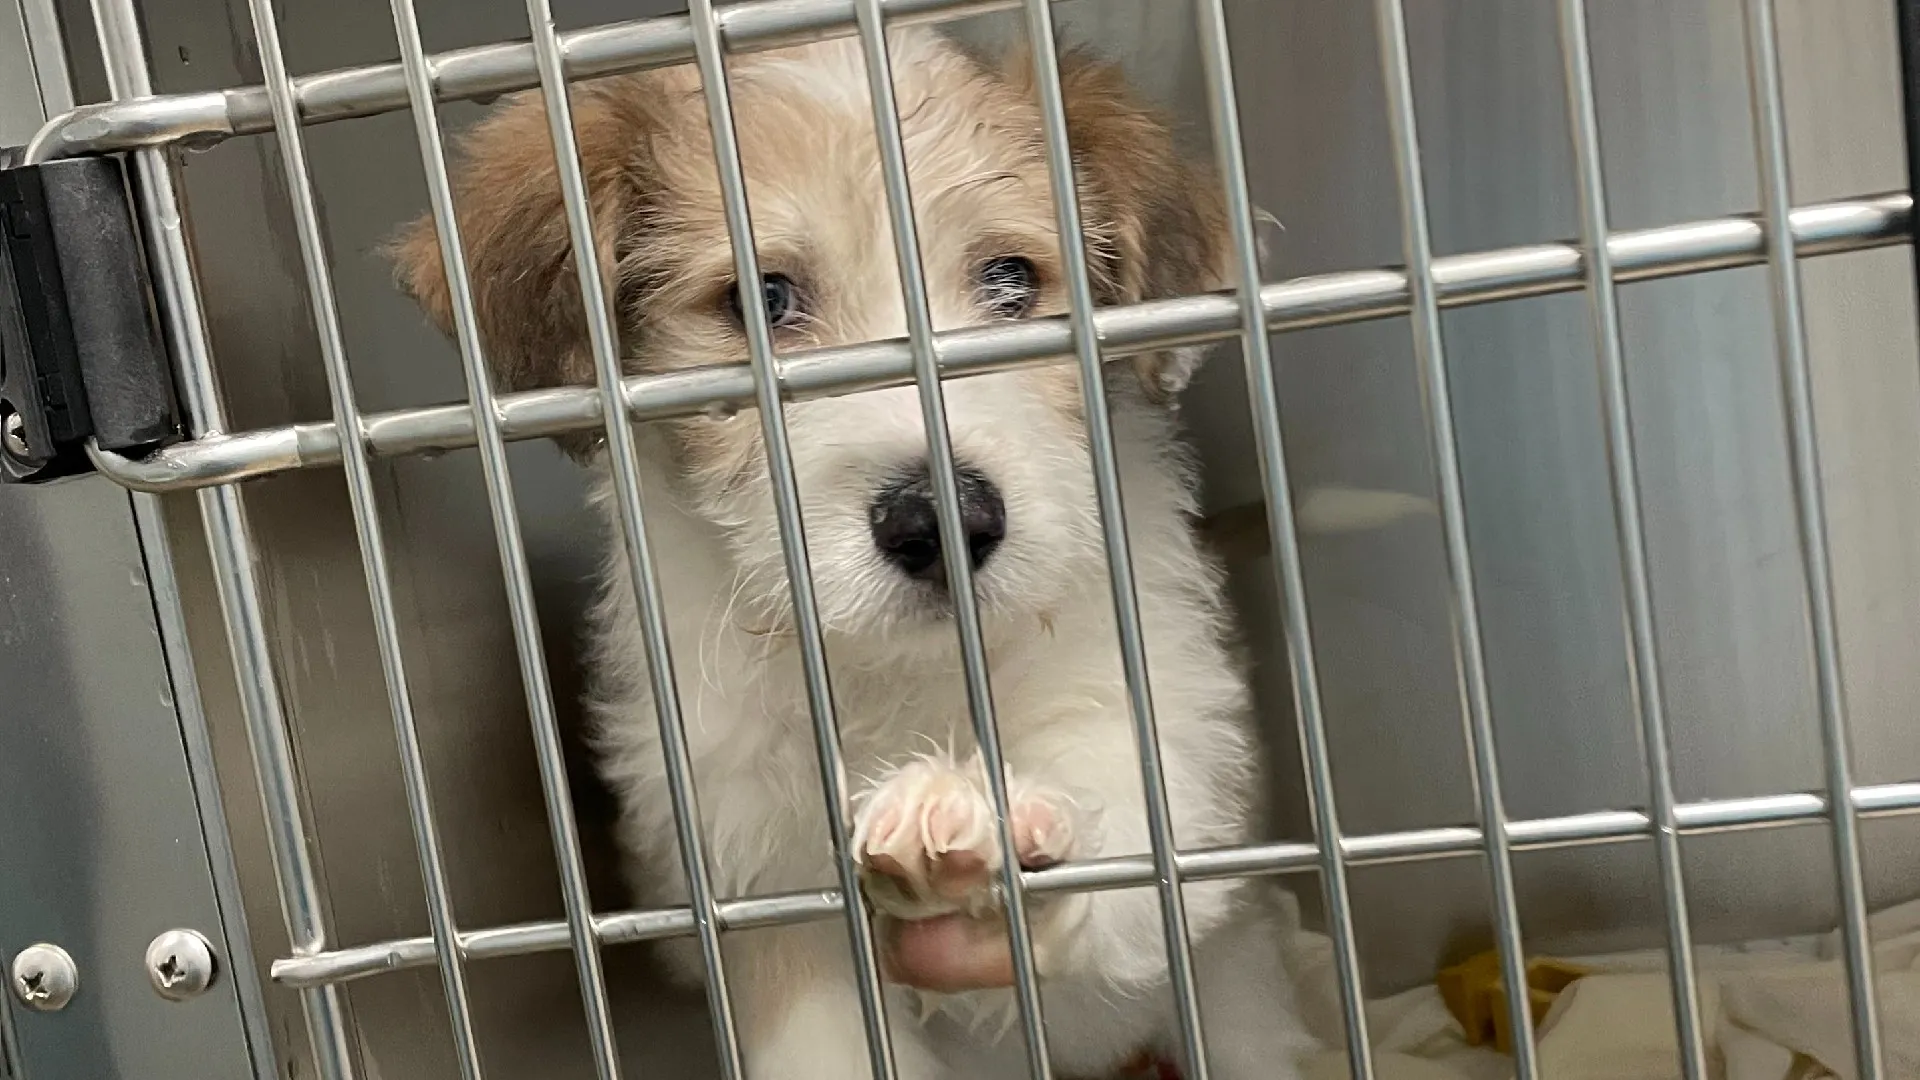 A photo of a young dog at a shelter